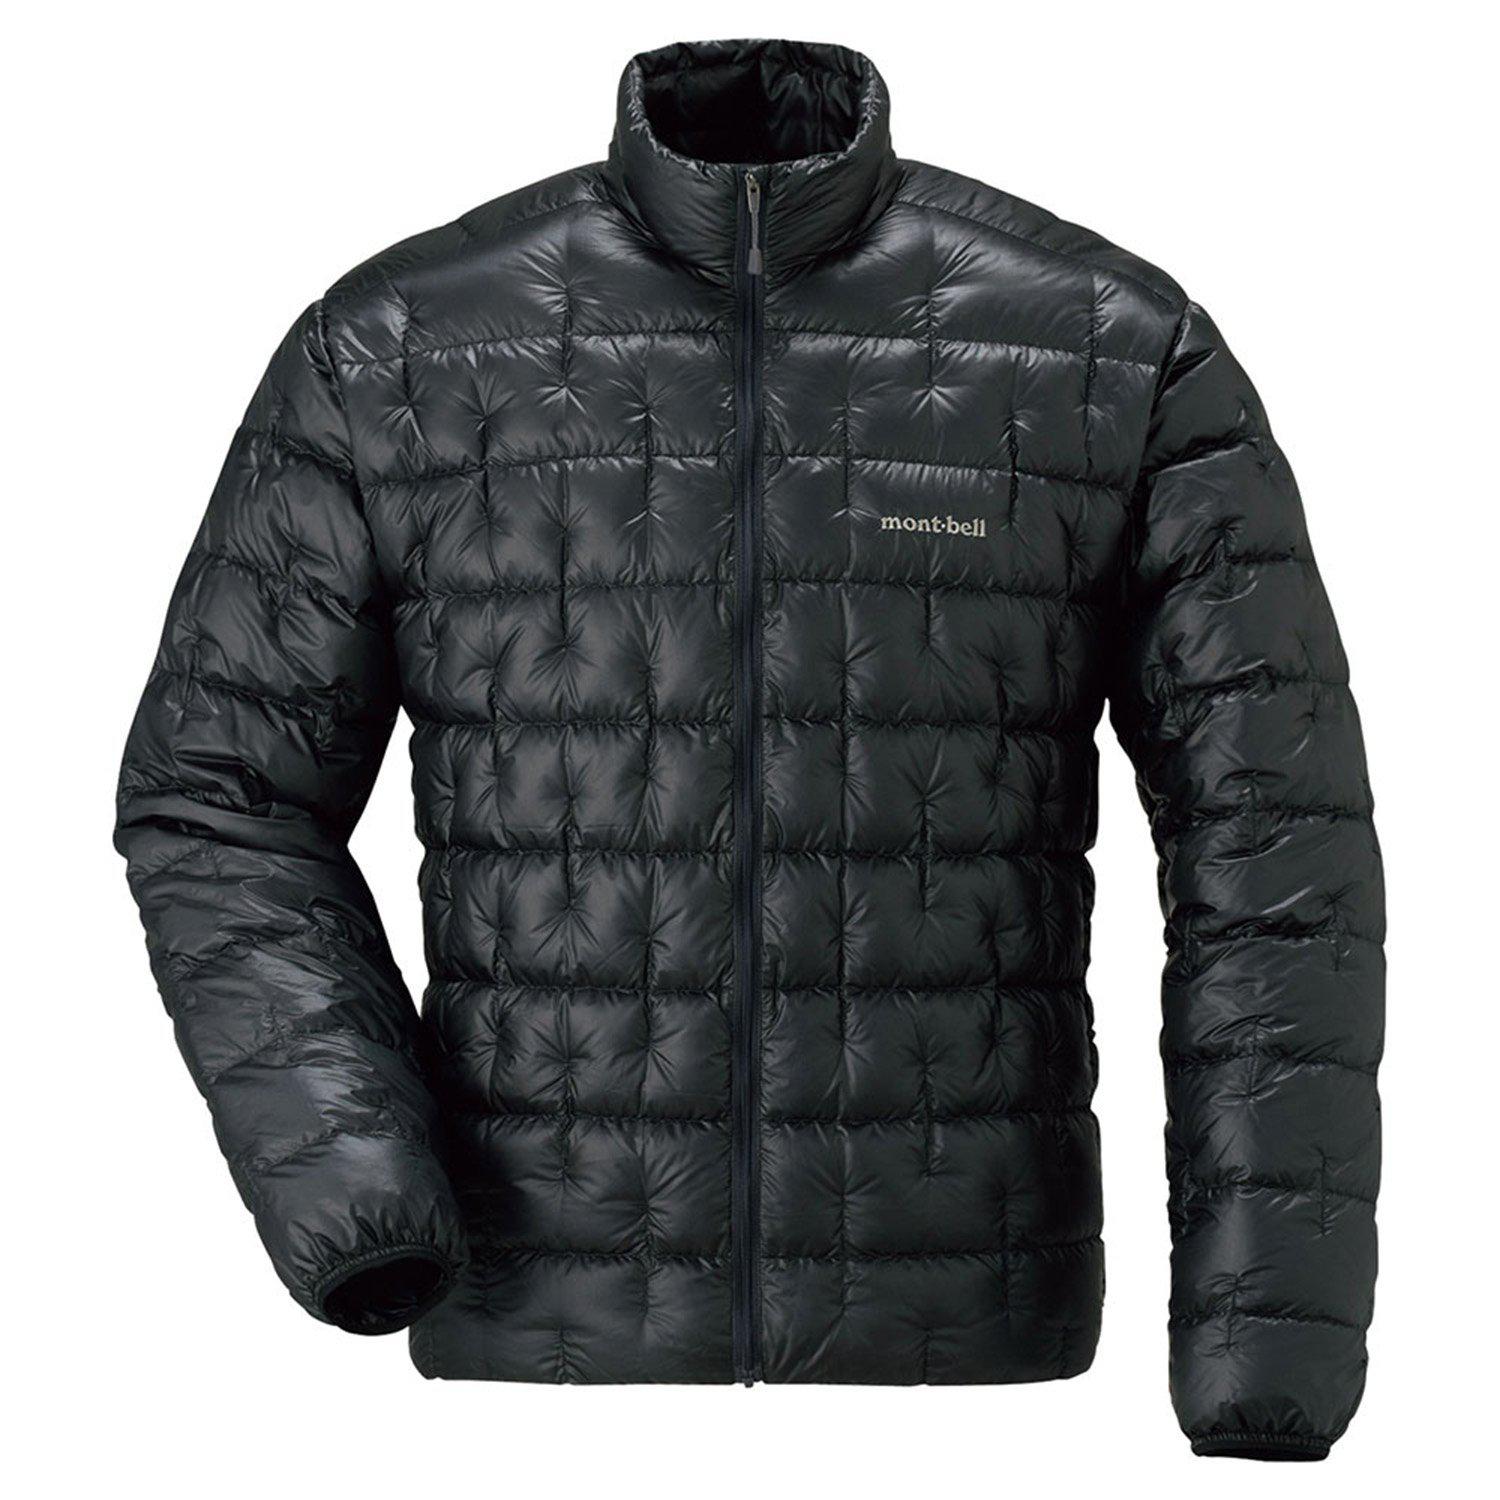 Montbell Men's Plasma 1000 Down Jacket - Size Large In Stock